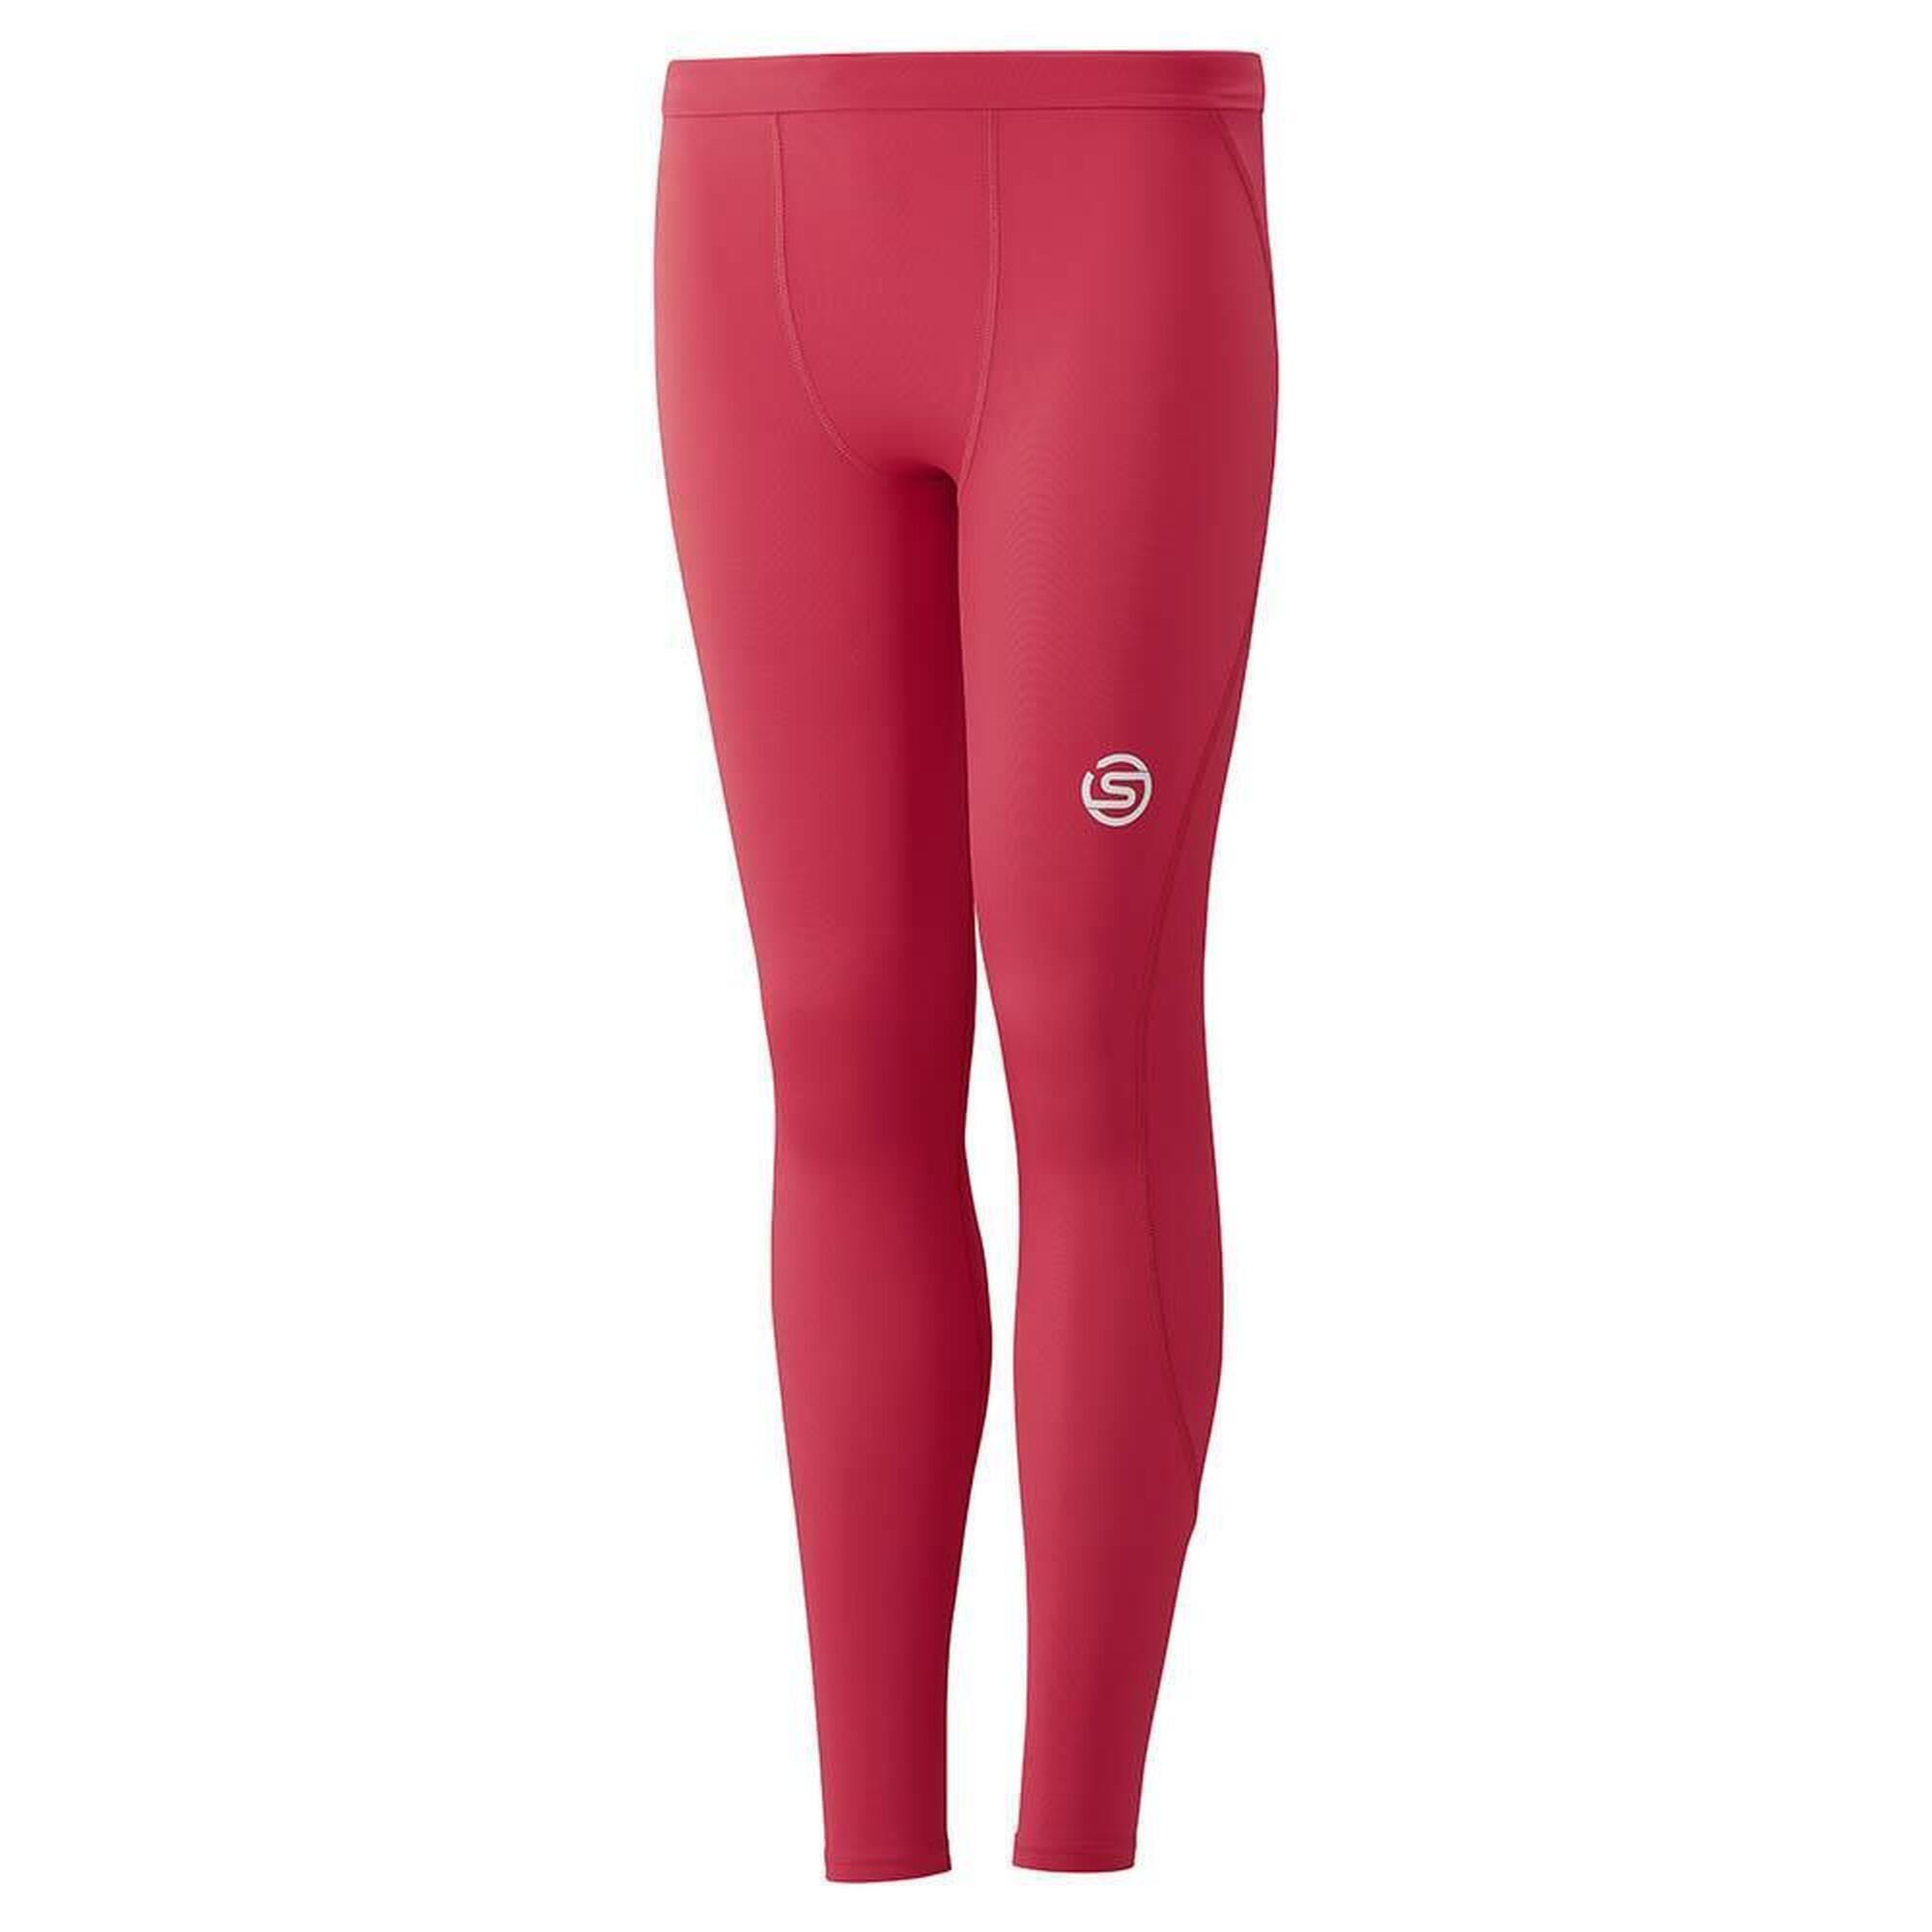 SKINS SKINS Series-1 Youth Tight - Red - Size L